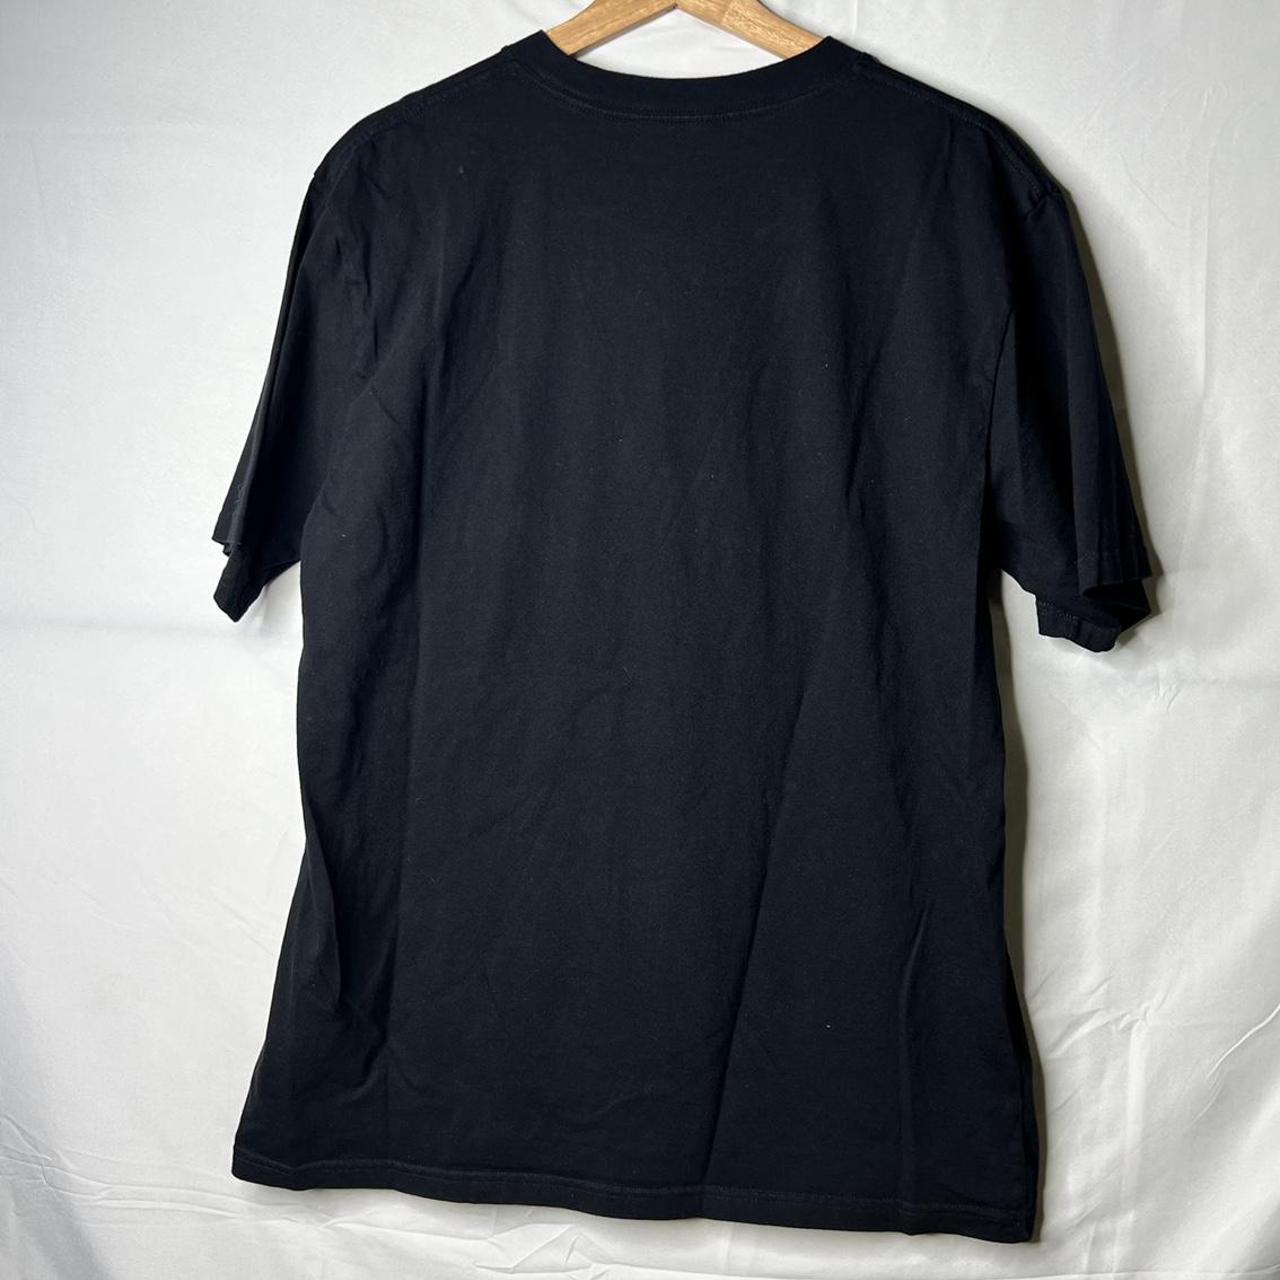 Product Image 3 - Carhartt WIP Harp T-Shirt

SIze L.